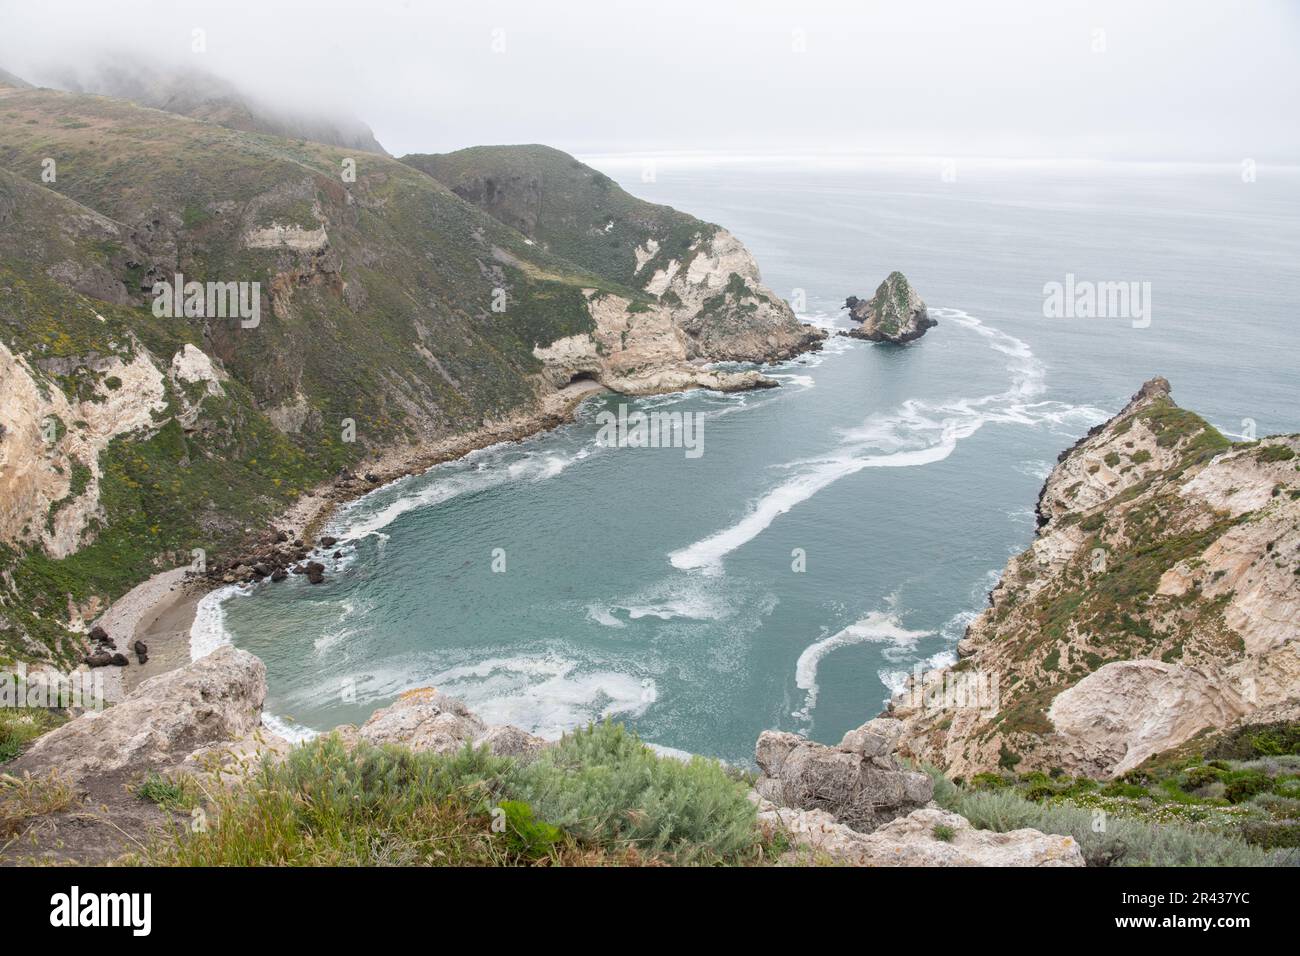 The dramatic coastline of Santa Cruz island in the Channel islands National Park, the landscape includes cliffs and the pacific ocean. Stock Photo